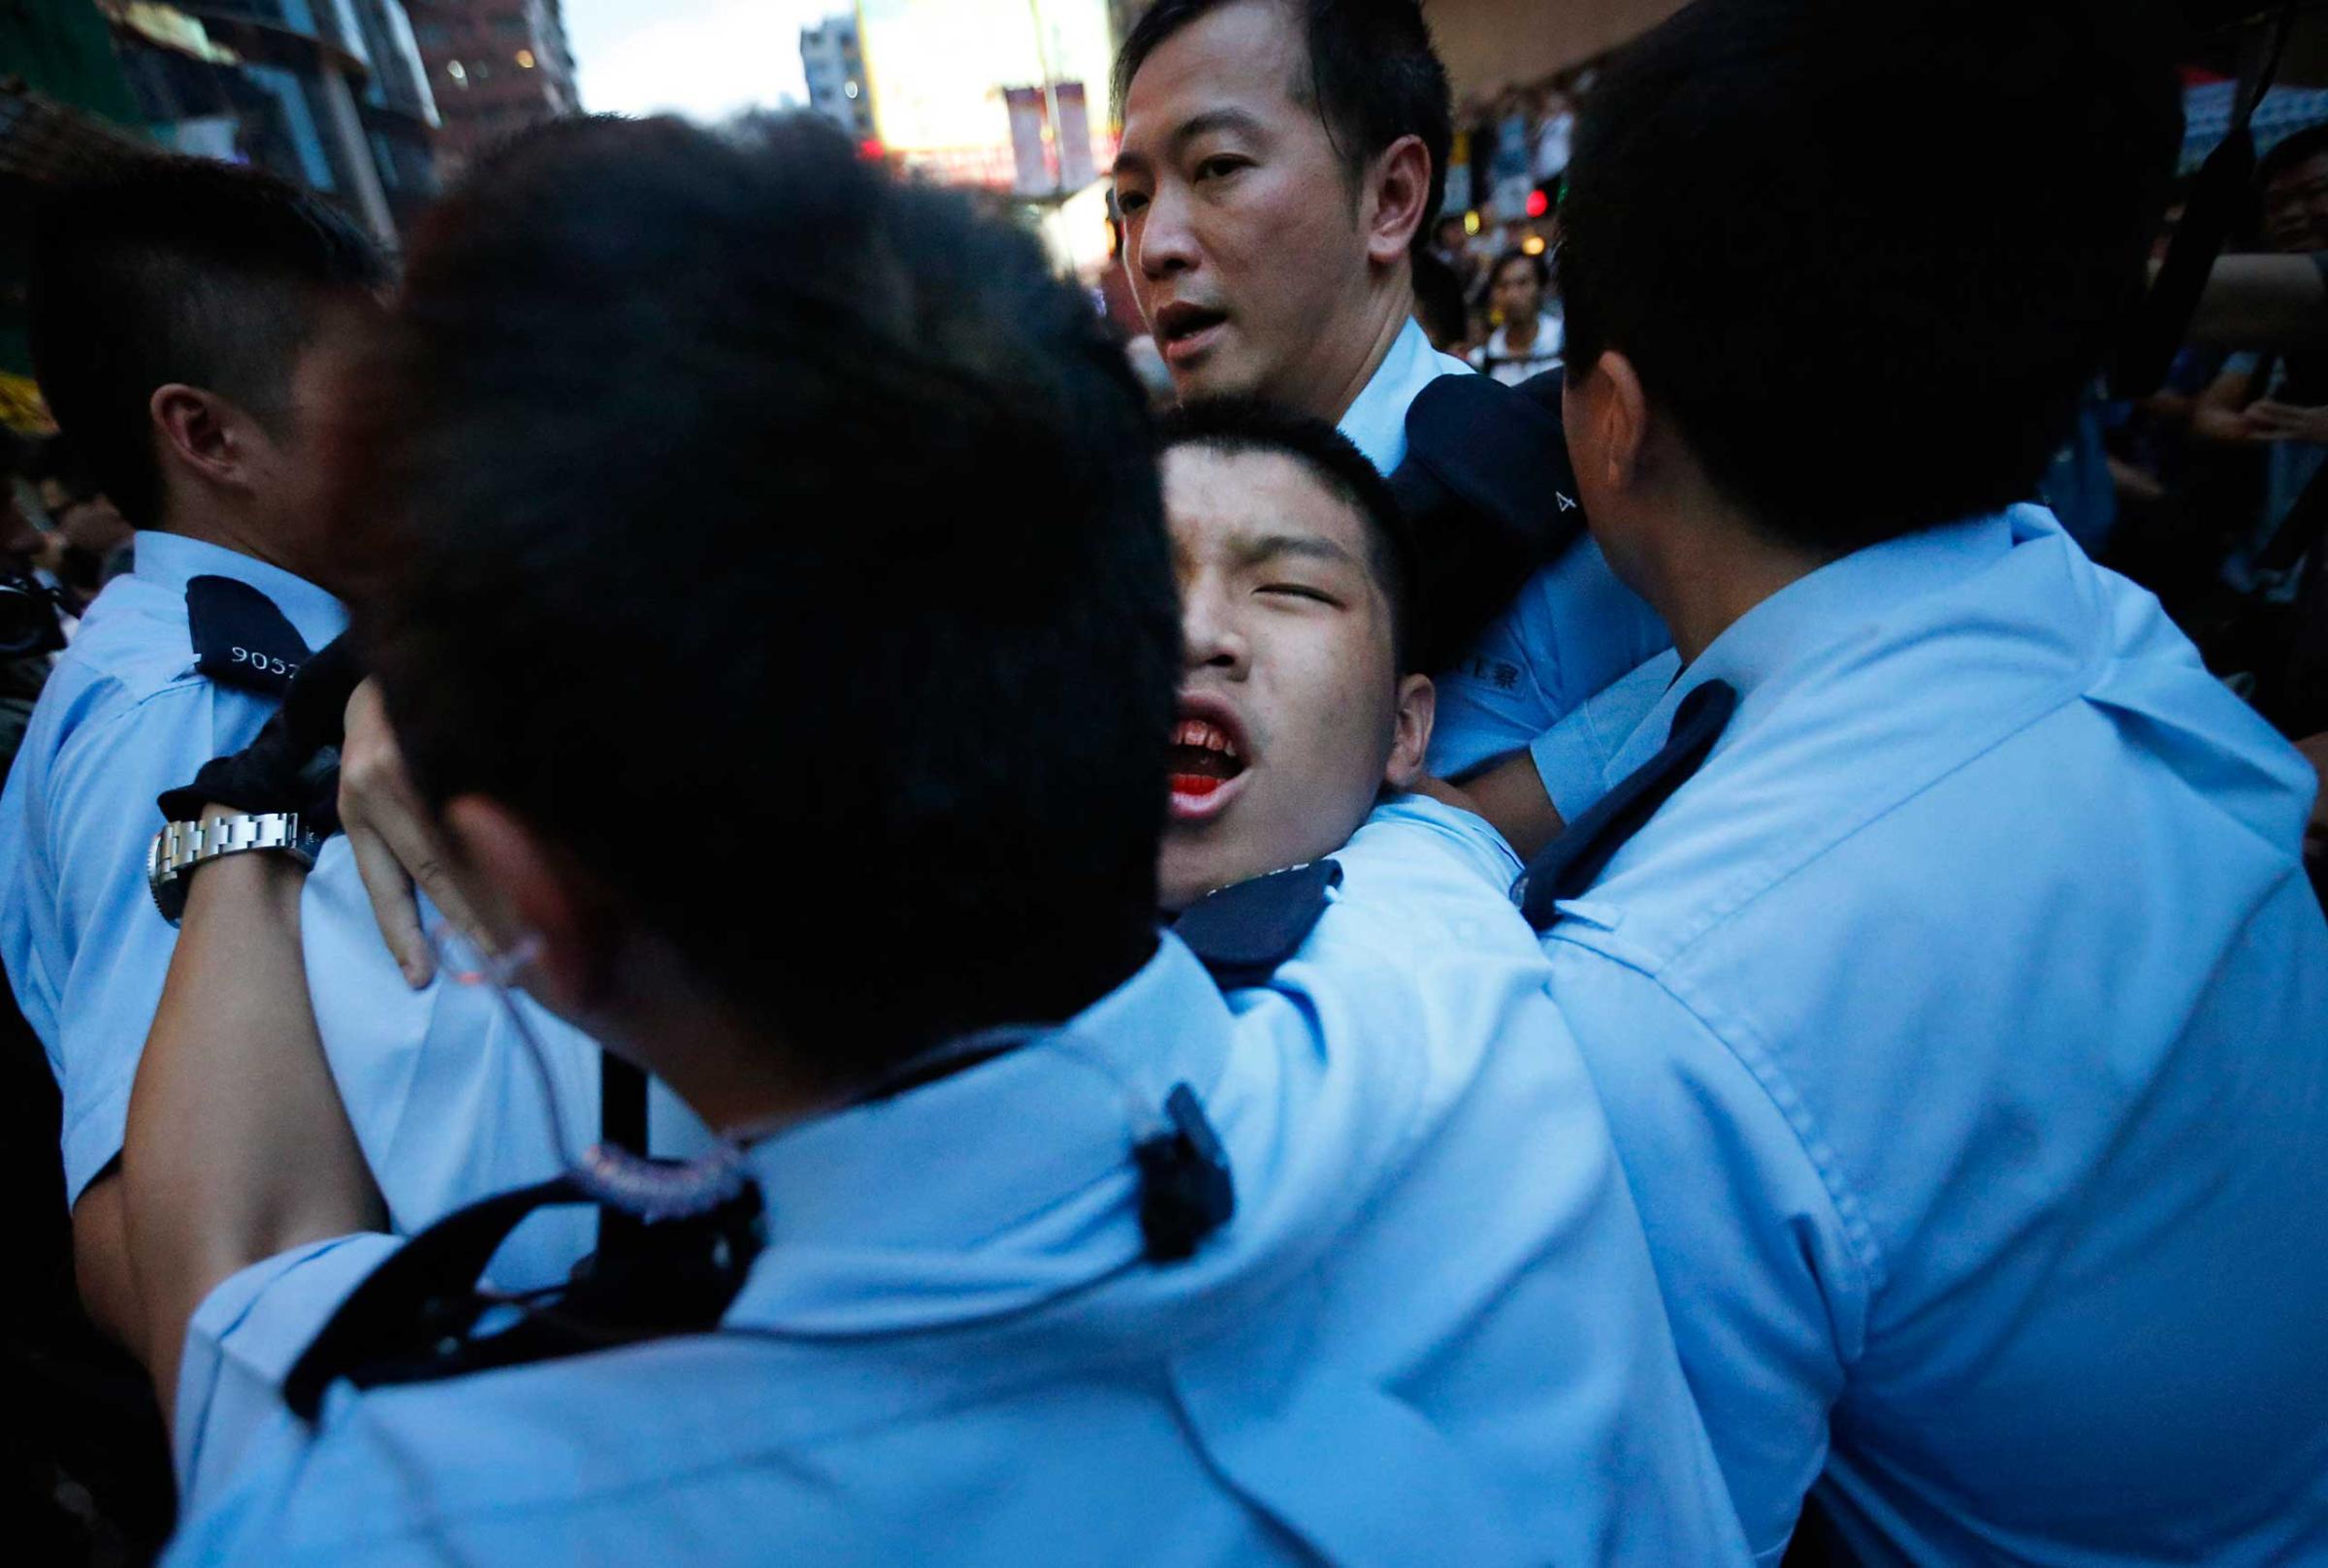 A student protester is injured after being pulled off and hit by residents and pro-Beijing supporters while local police are escorting him out of the protest area in Kowloon's crowded Mong Kok district, Oct. 3, 2014 in Hong Kong.